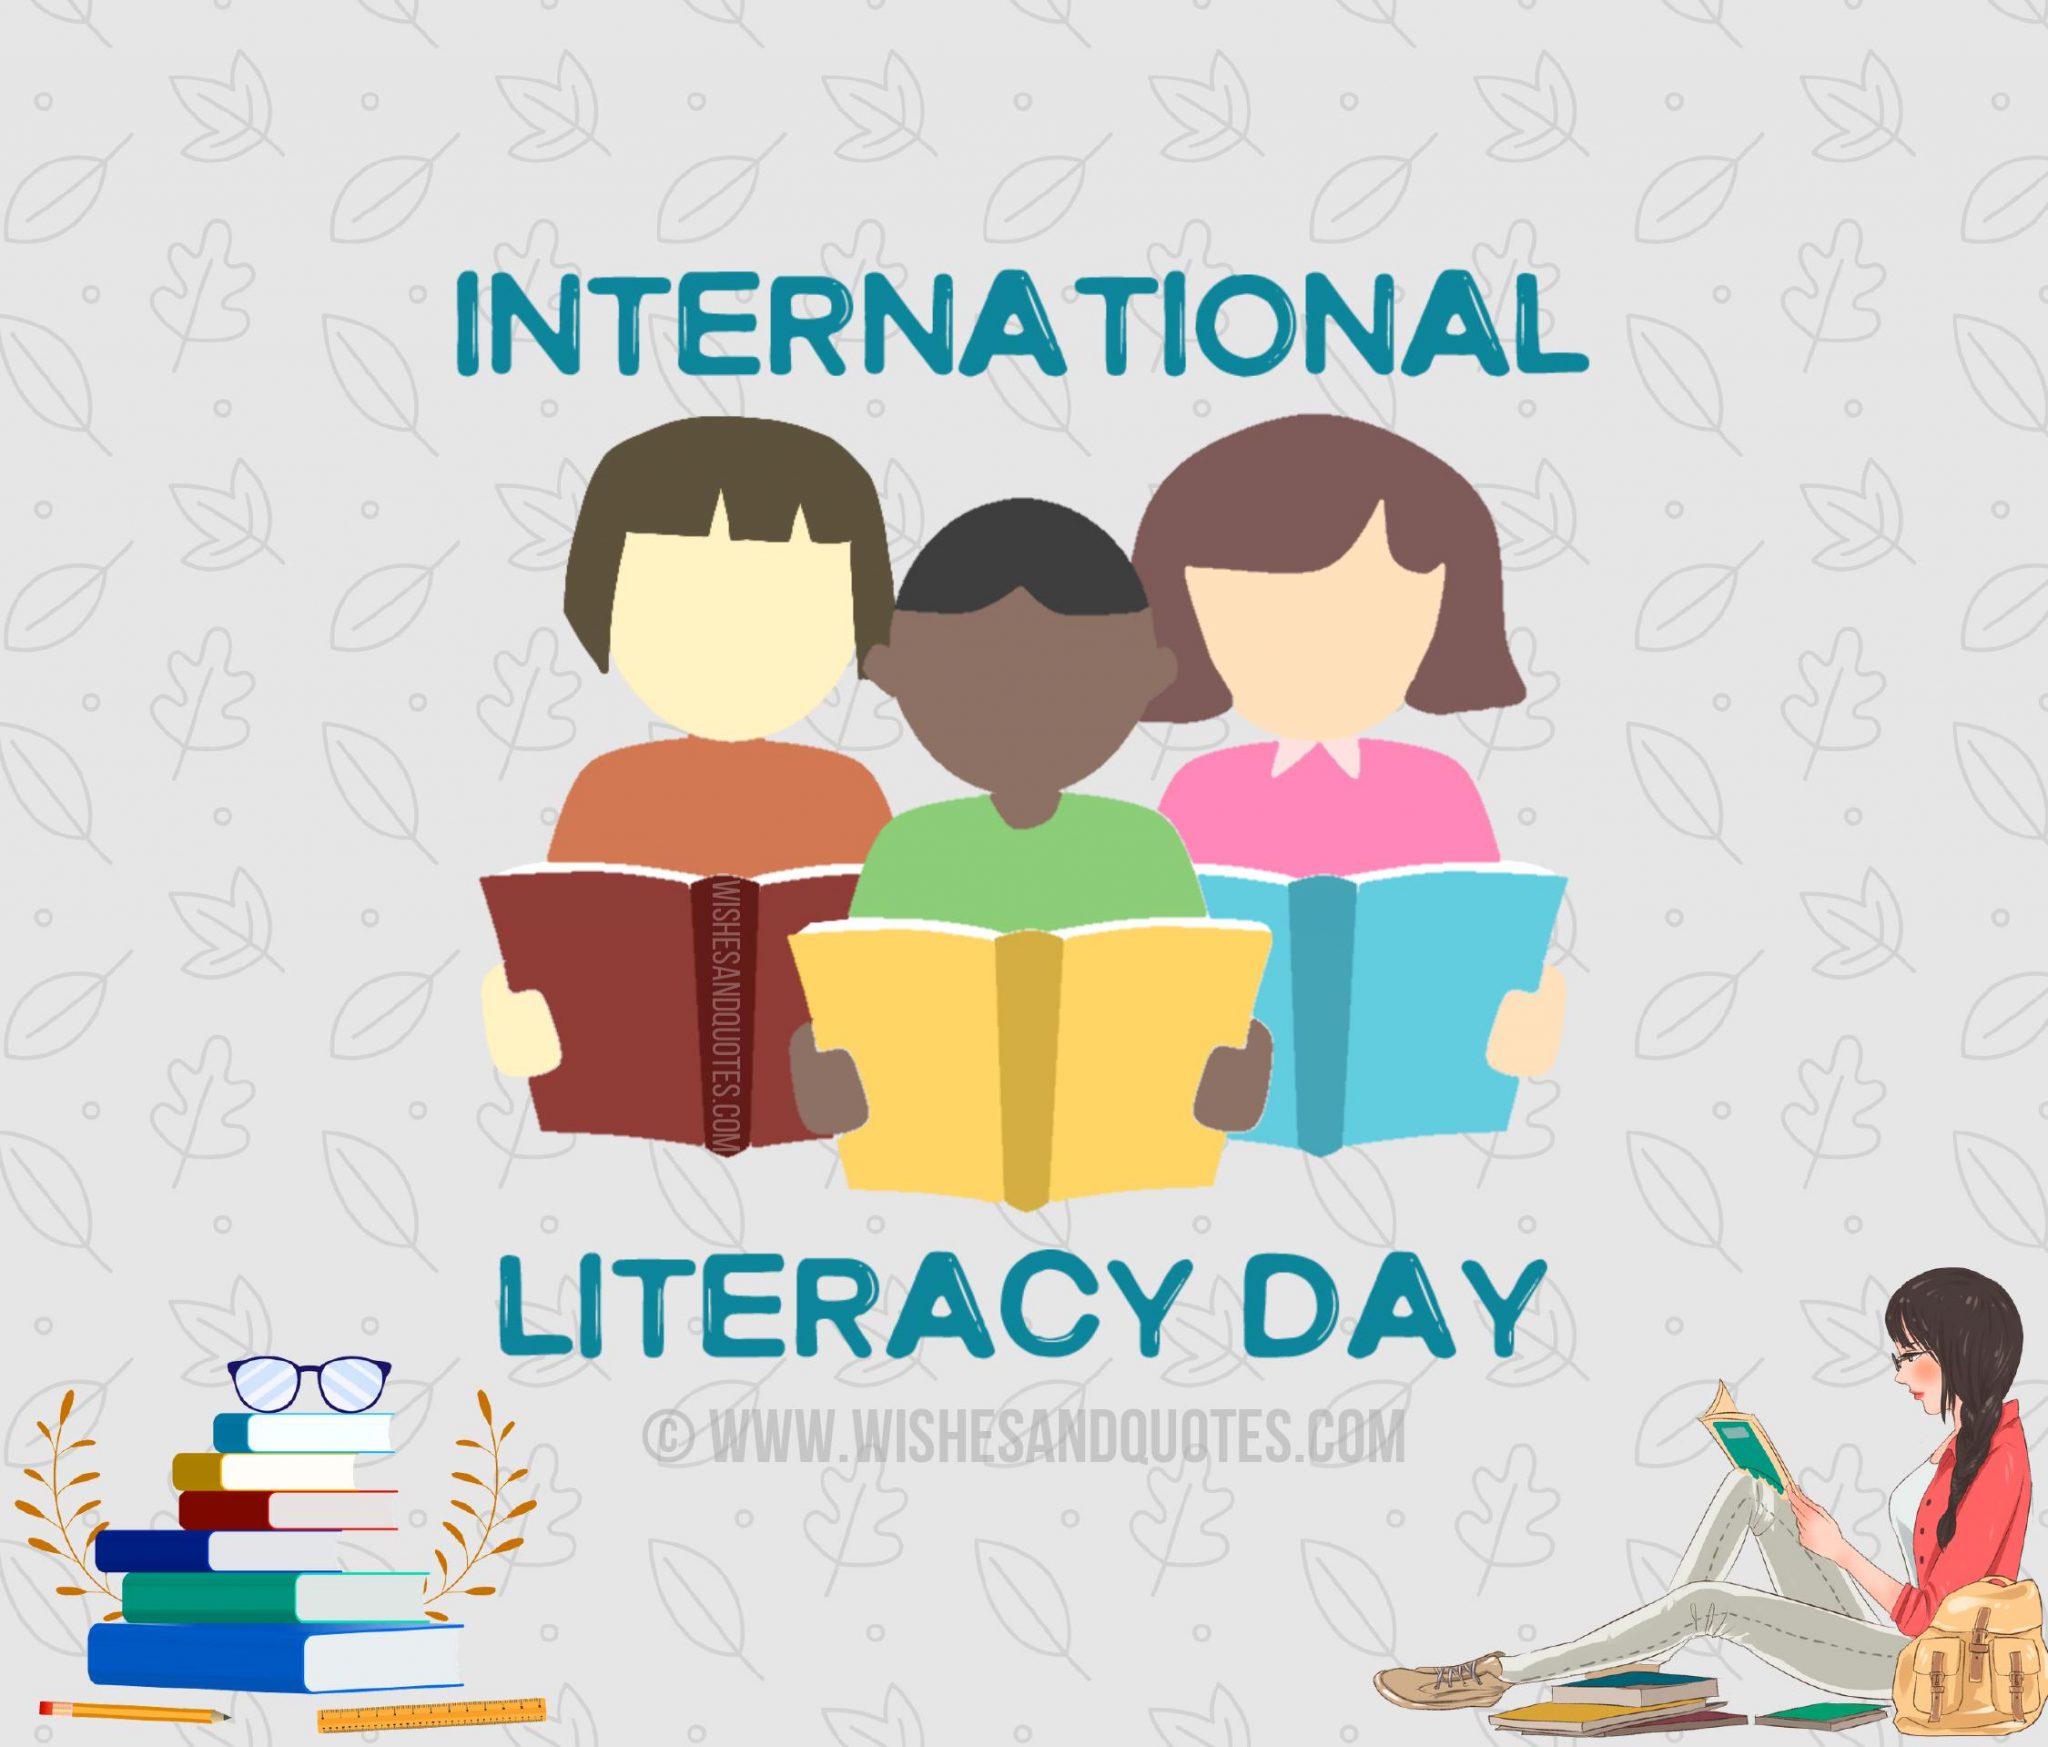 International Literacy Day Wishes, Quotes, Messages, Status, Greetings